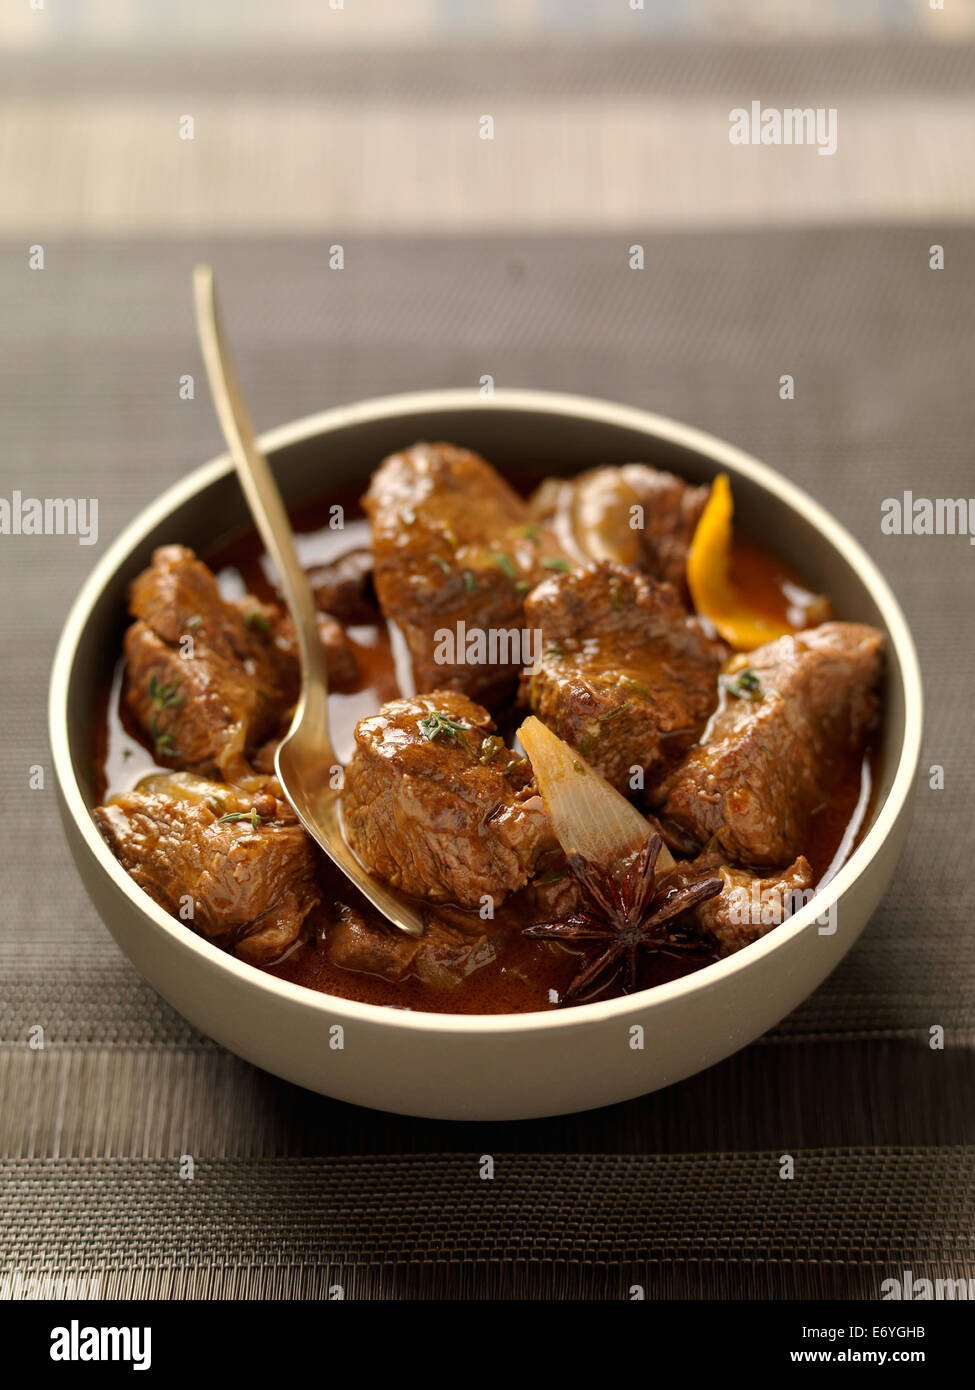 Spicy horse meat stew Stock Photo